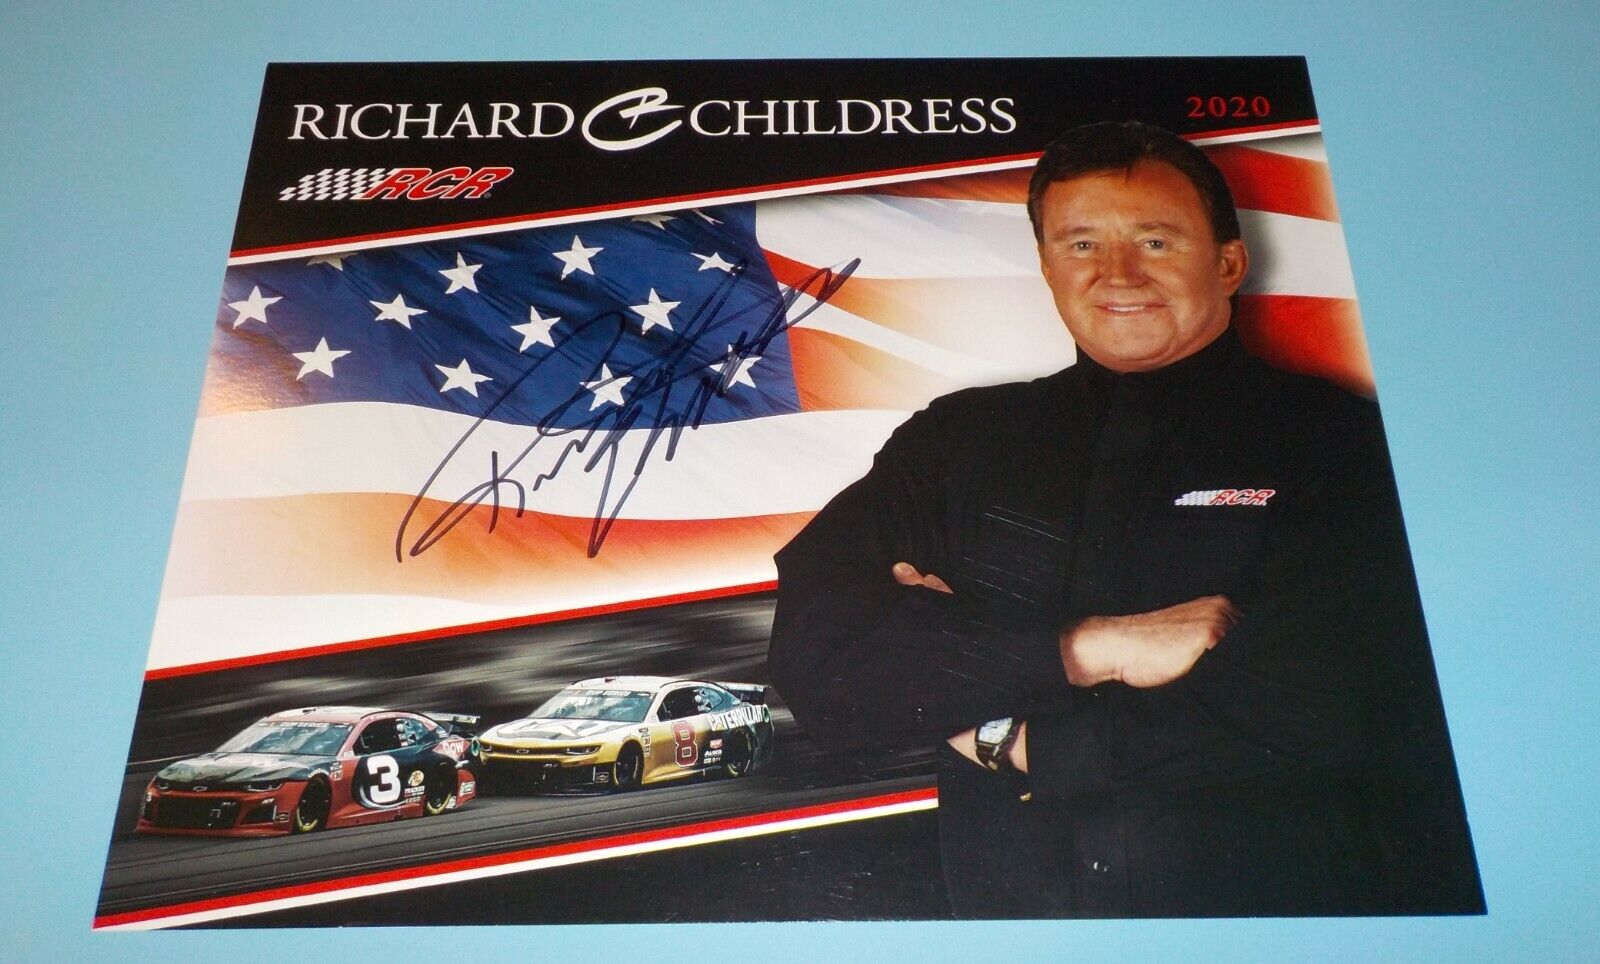 Richard Childress Signed Autographed 8 x 10 Photo Poster painting Nascar Driver